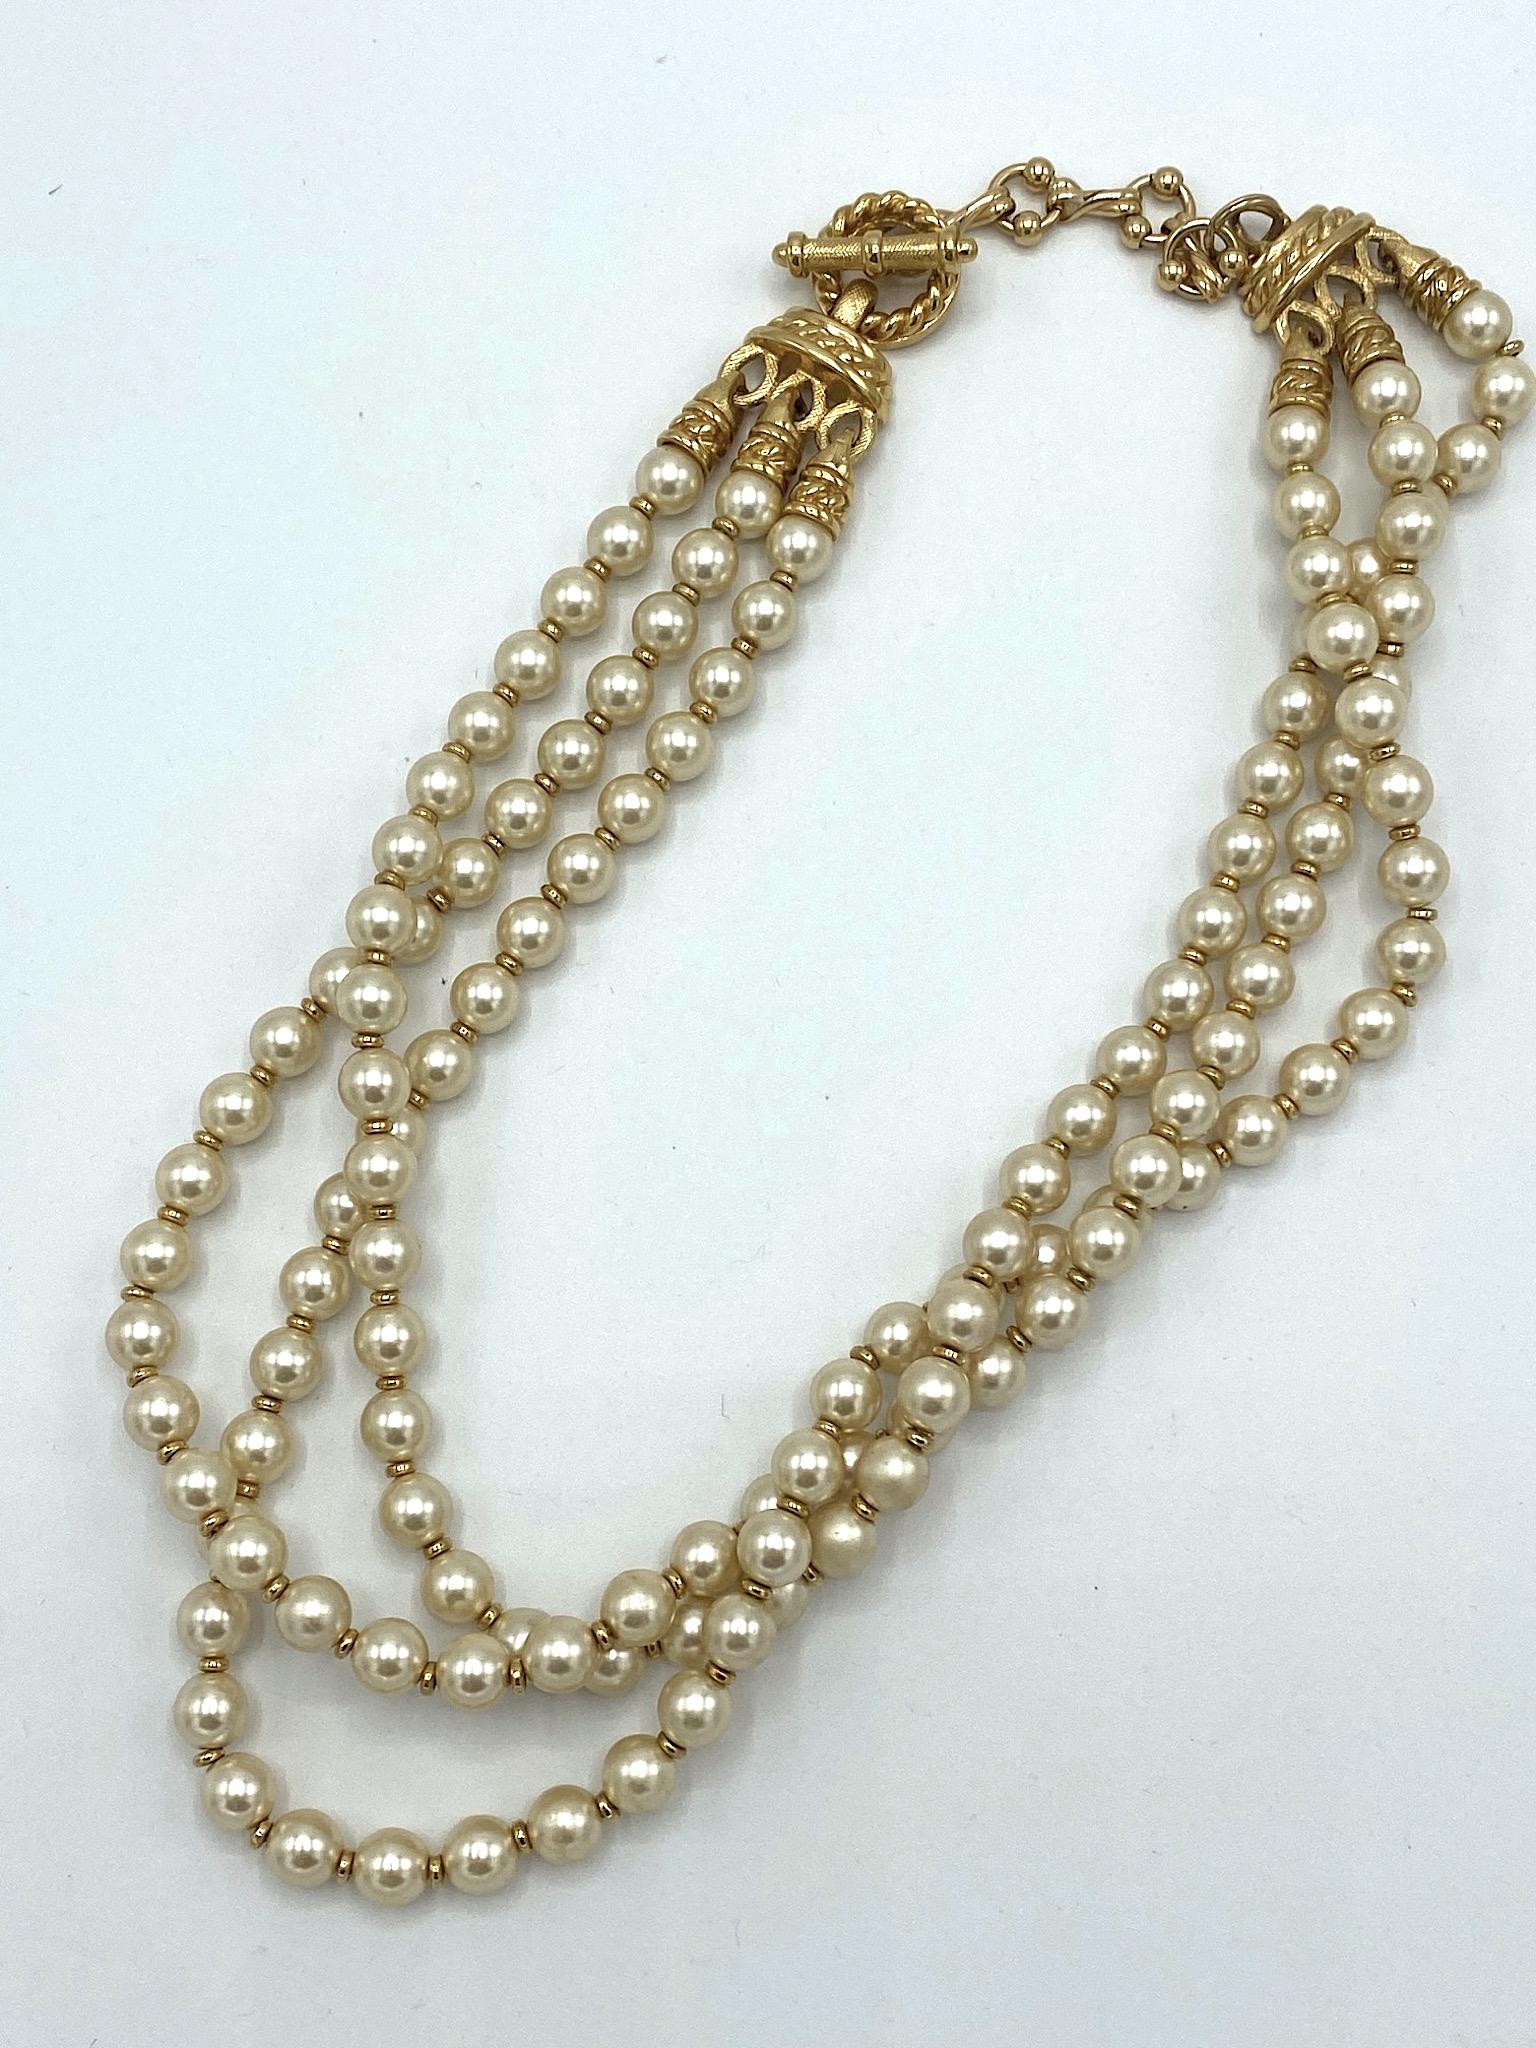 Classic three stand necklace by American fashion house St. John. Three strands of creamy white 8 mm faux pearls are strung with small gold disk spacer beads. The end beads are finished with gold rope twist design end caps and attach to the multi